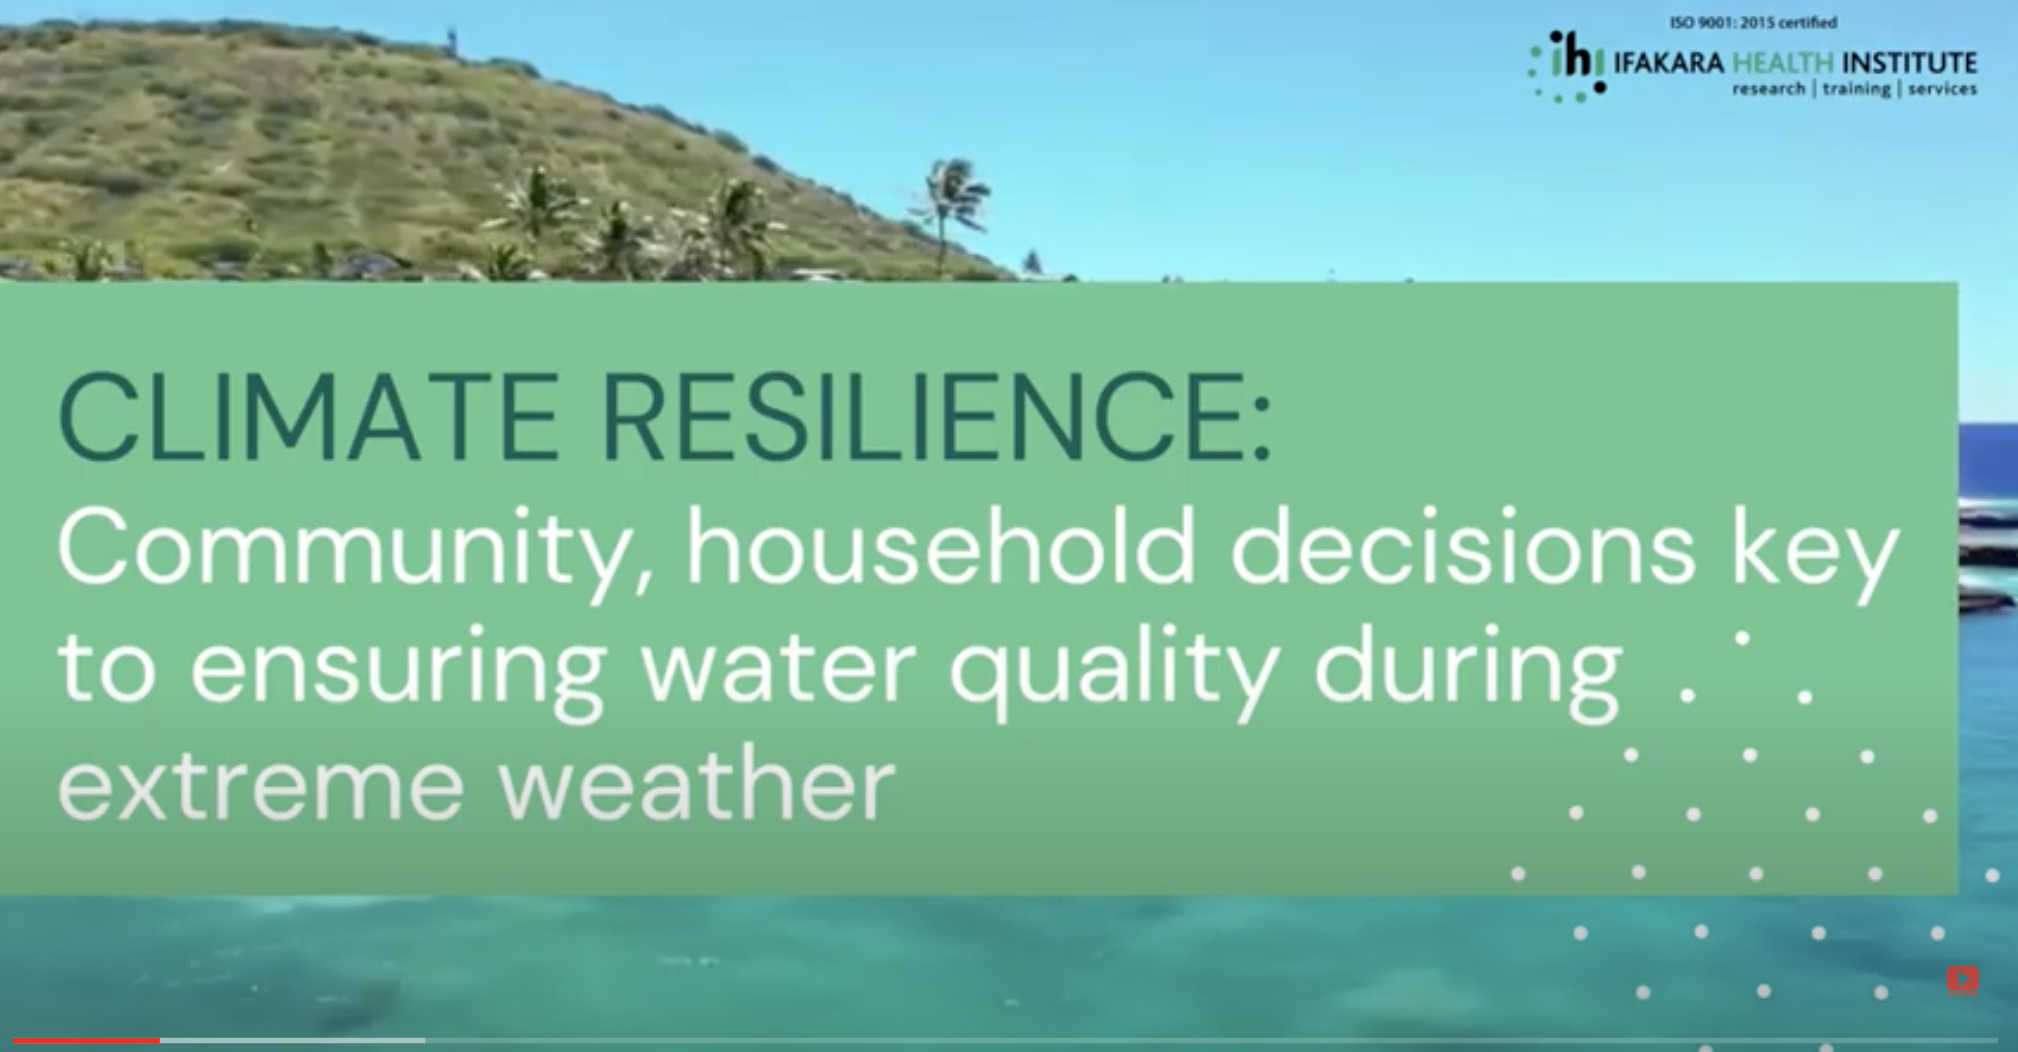 CLIMATE RESILIENCE